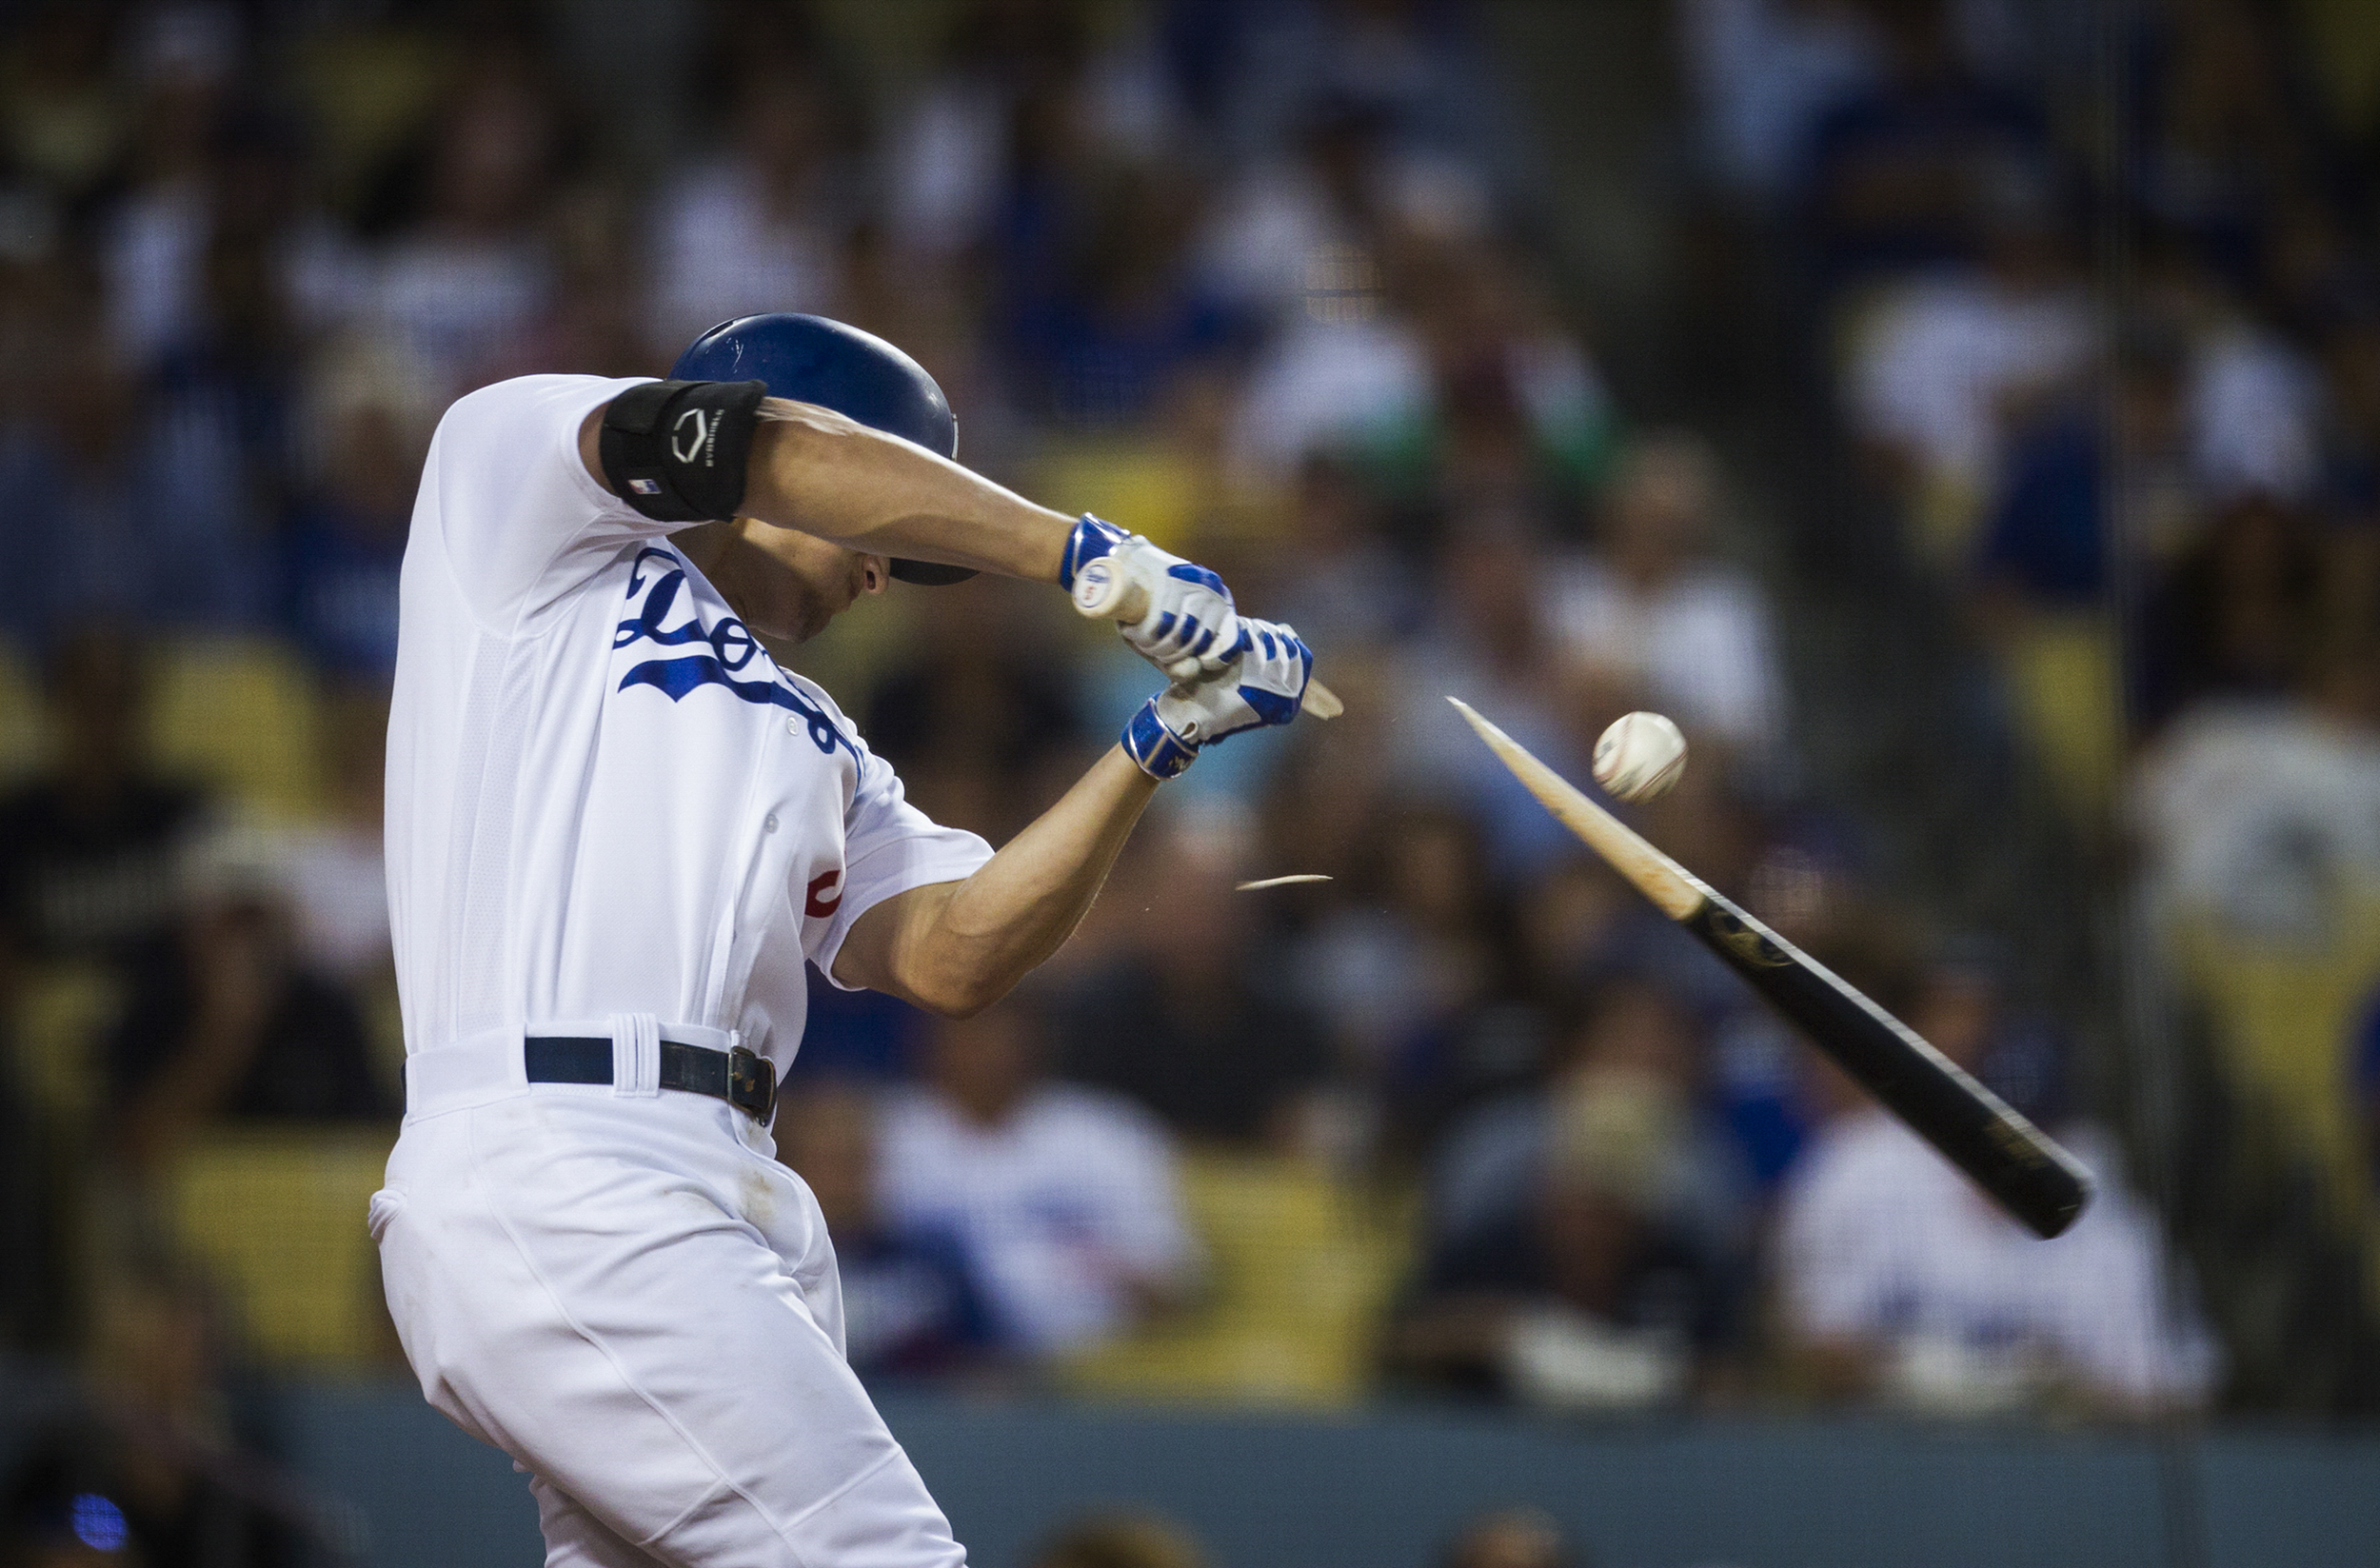  Los Angeles Dodgers Corey Seager breaks his bat in the third inning while batting against the Arizona Diamondbacks on Friday, July 29, 2016.&nbsp;    